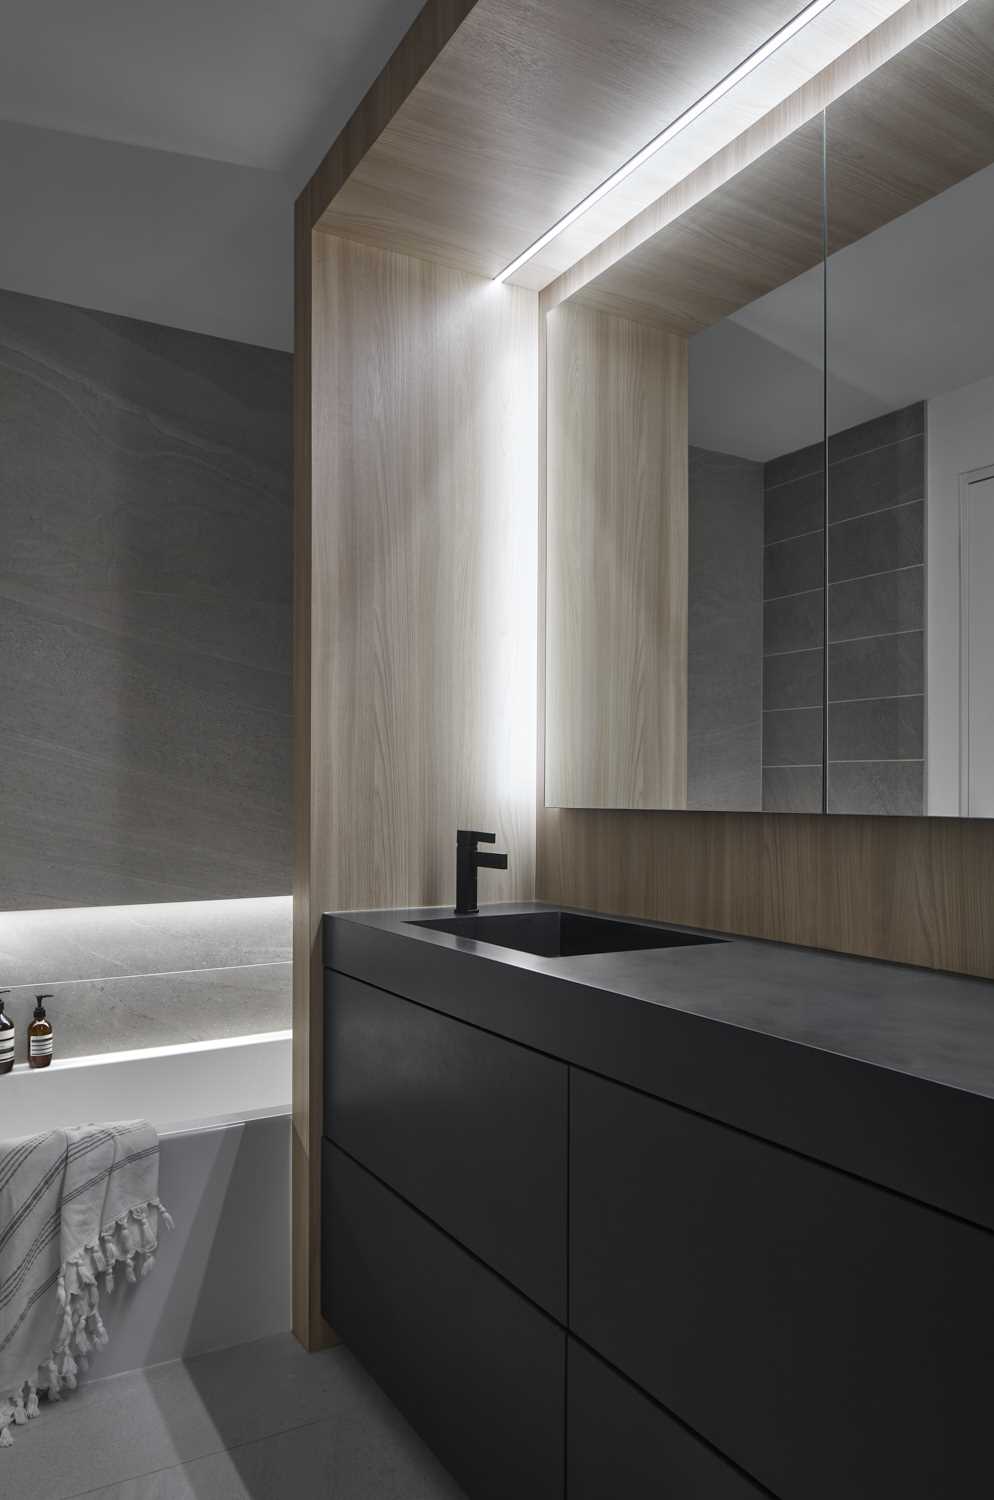 A modern bathroom with a dark vanity that has a wood surround with embedded lighting, and a built-in bathtub.